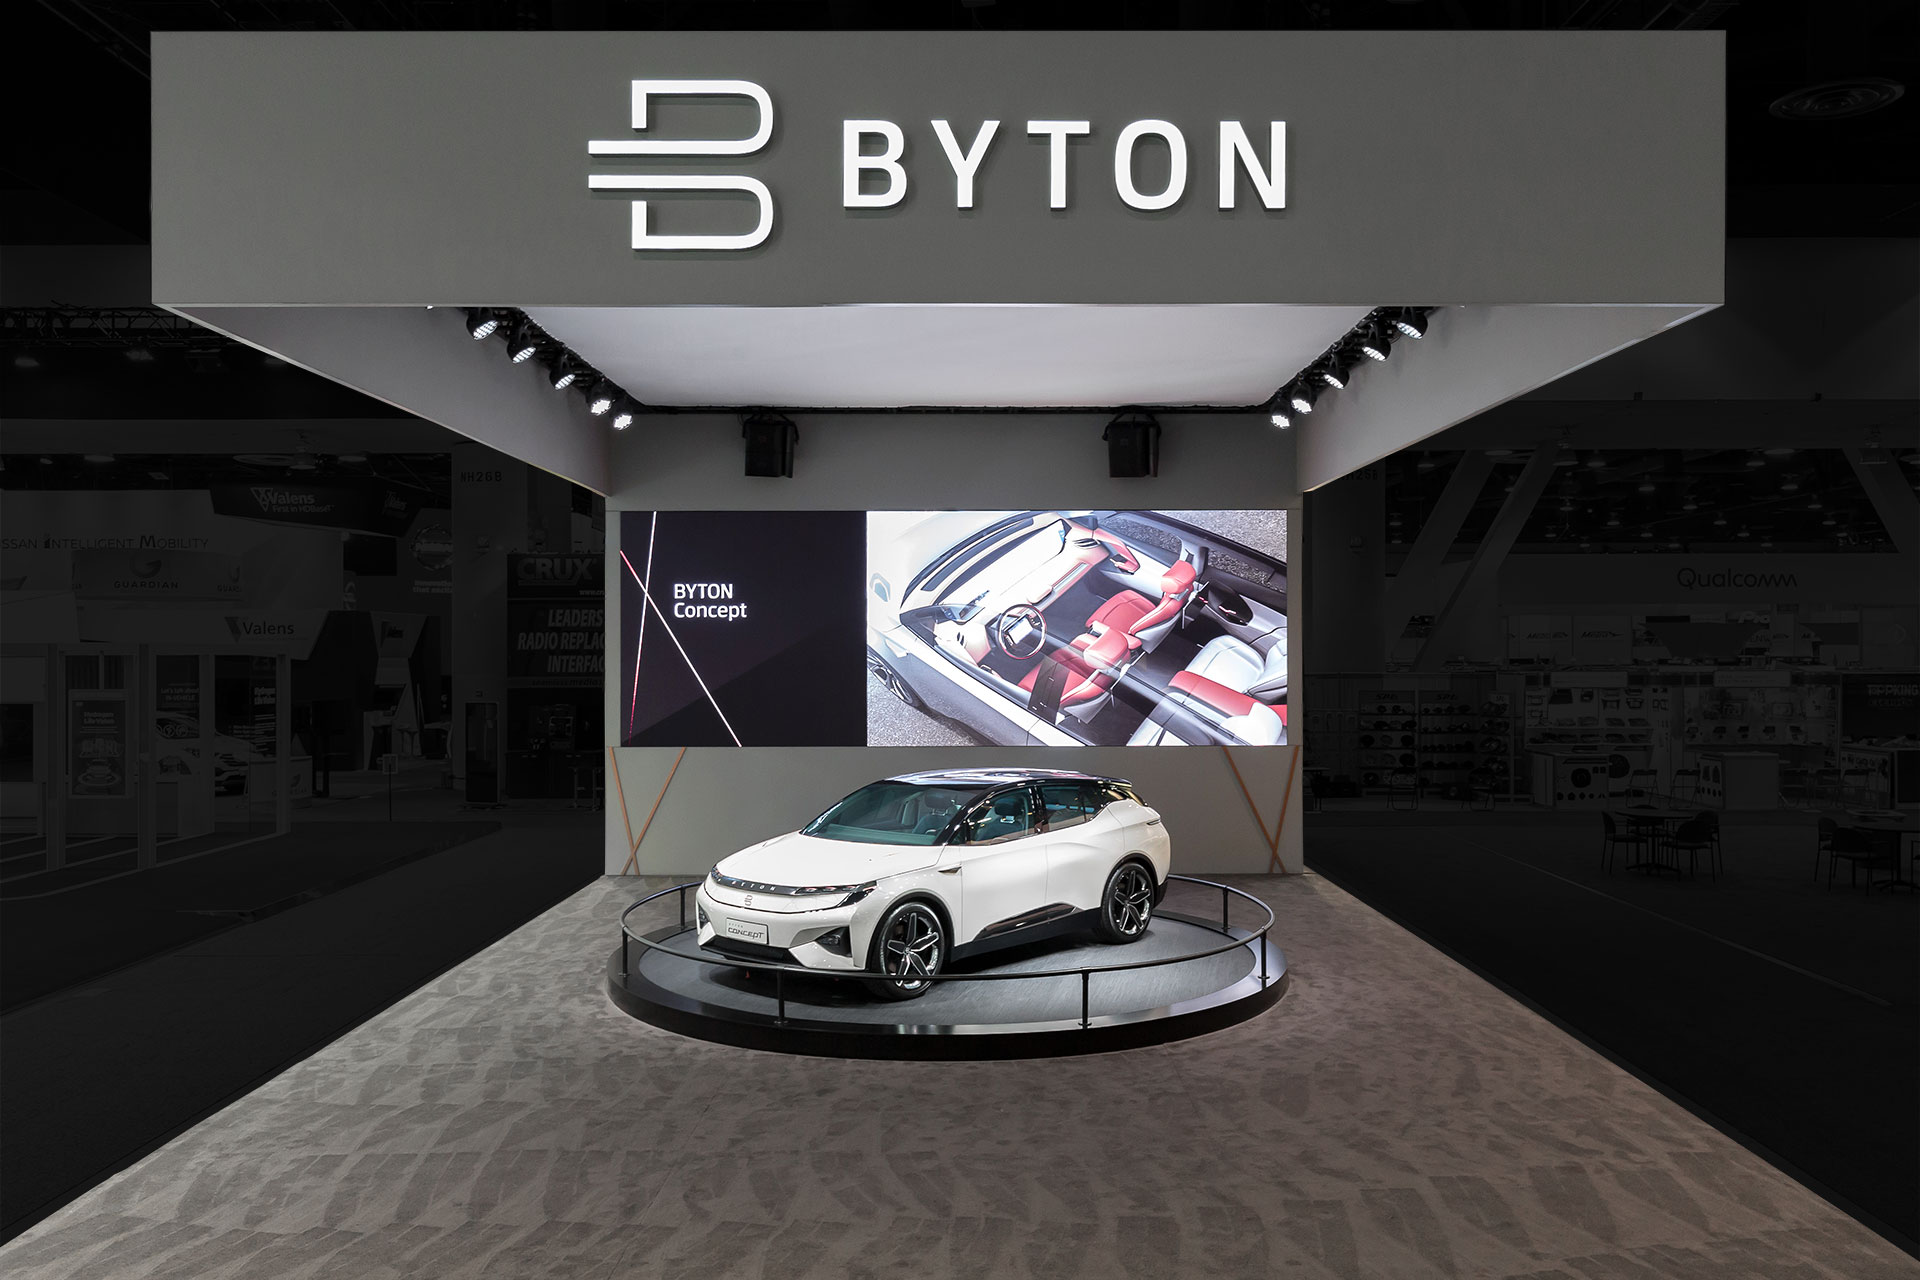 Byton Electric Car CES Tradeshow Exhibit with a white automobile on a turntable on grey carpet with a white ceiling and grey walls and a white Byton logo above.